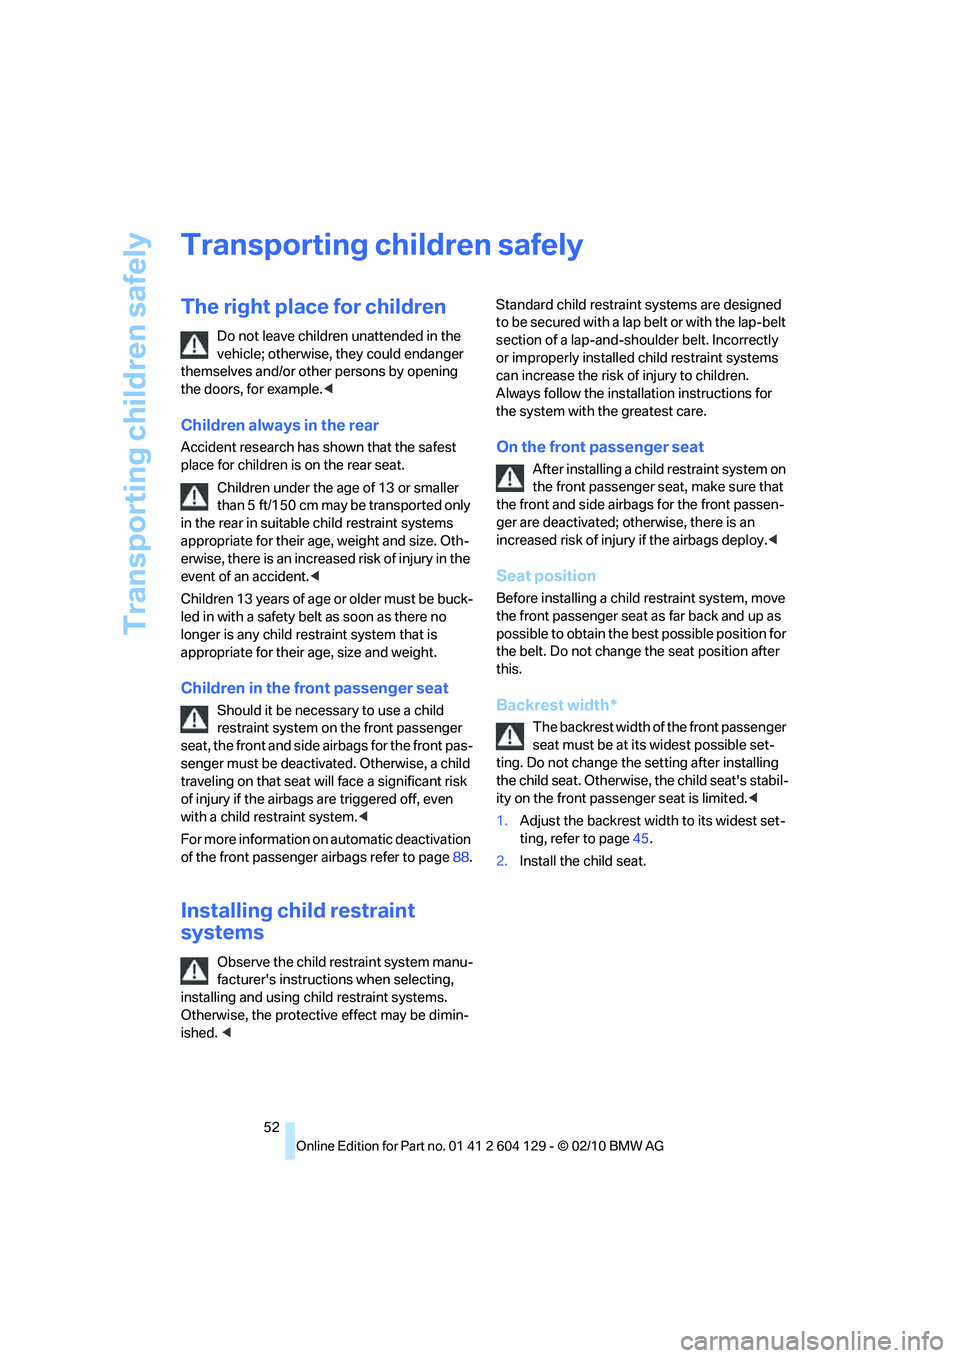 BMW 1 SERIES 2011  Owners Manual Transporting children safely
52
Transporting children safely
The right place for children
Do not leave children unattended in the 
vehicle; otherwise, they could endanger 
themselves and/or other pers